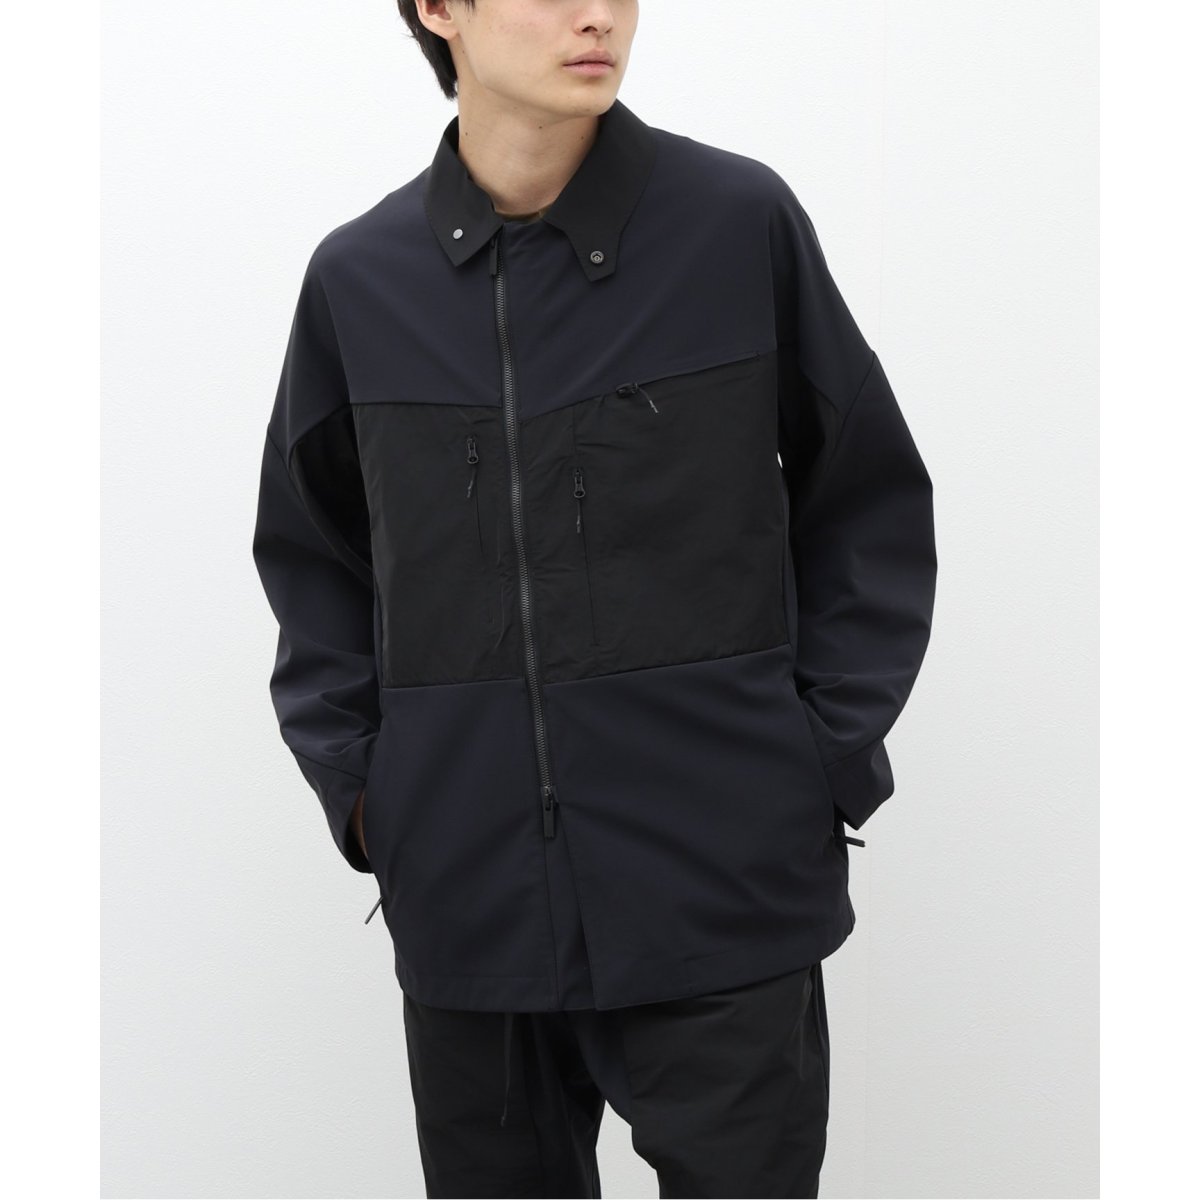 White Mountaineering】WINDSSTOPPER ZIP COVERALL | エディフィス